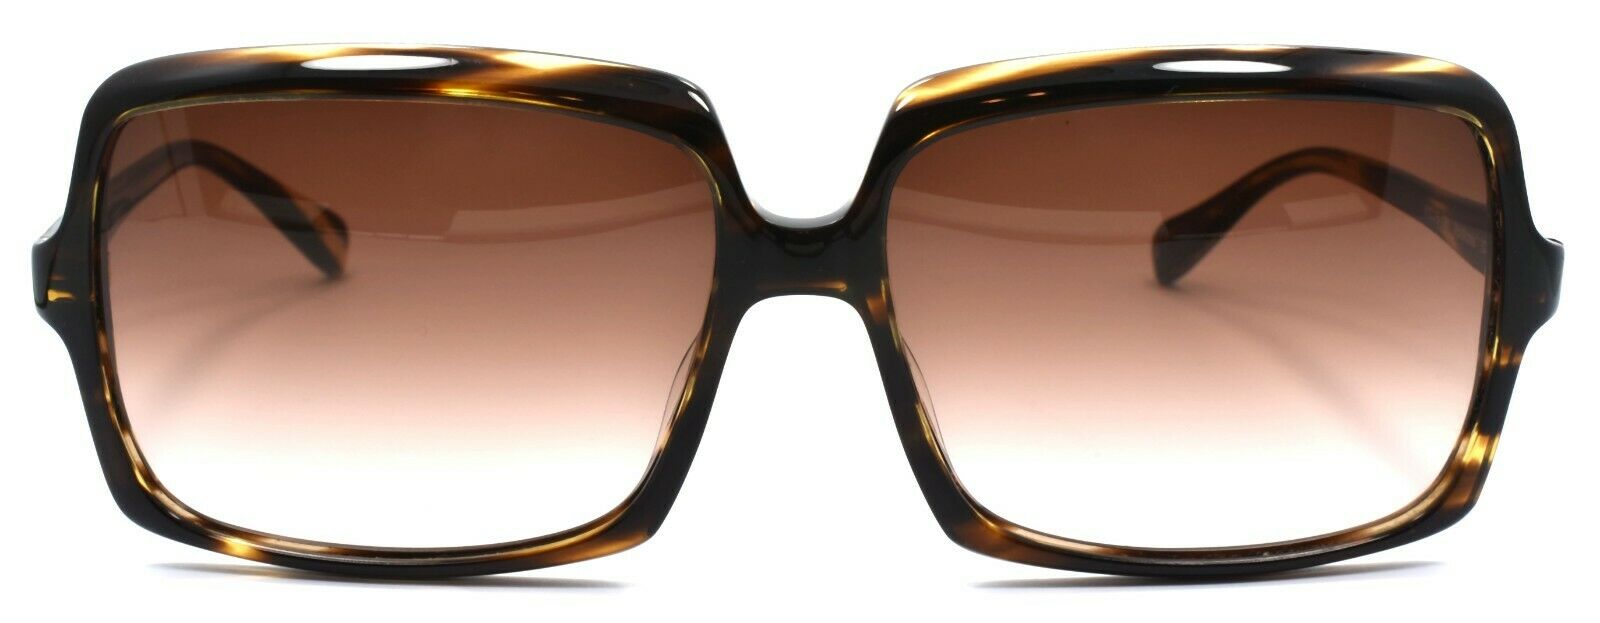 2-Oliver Peoples Apollonia COCO Women's Sunglasses Cocobolo / Brown Gradient JAPAN-Does not apply-IKSpecs